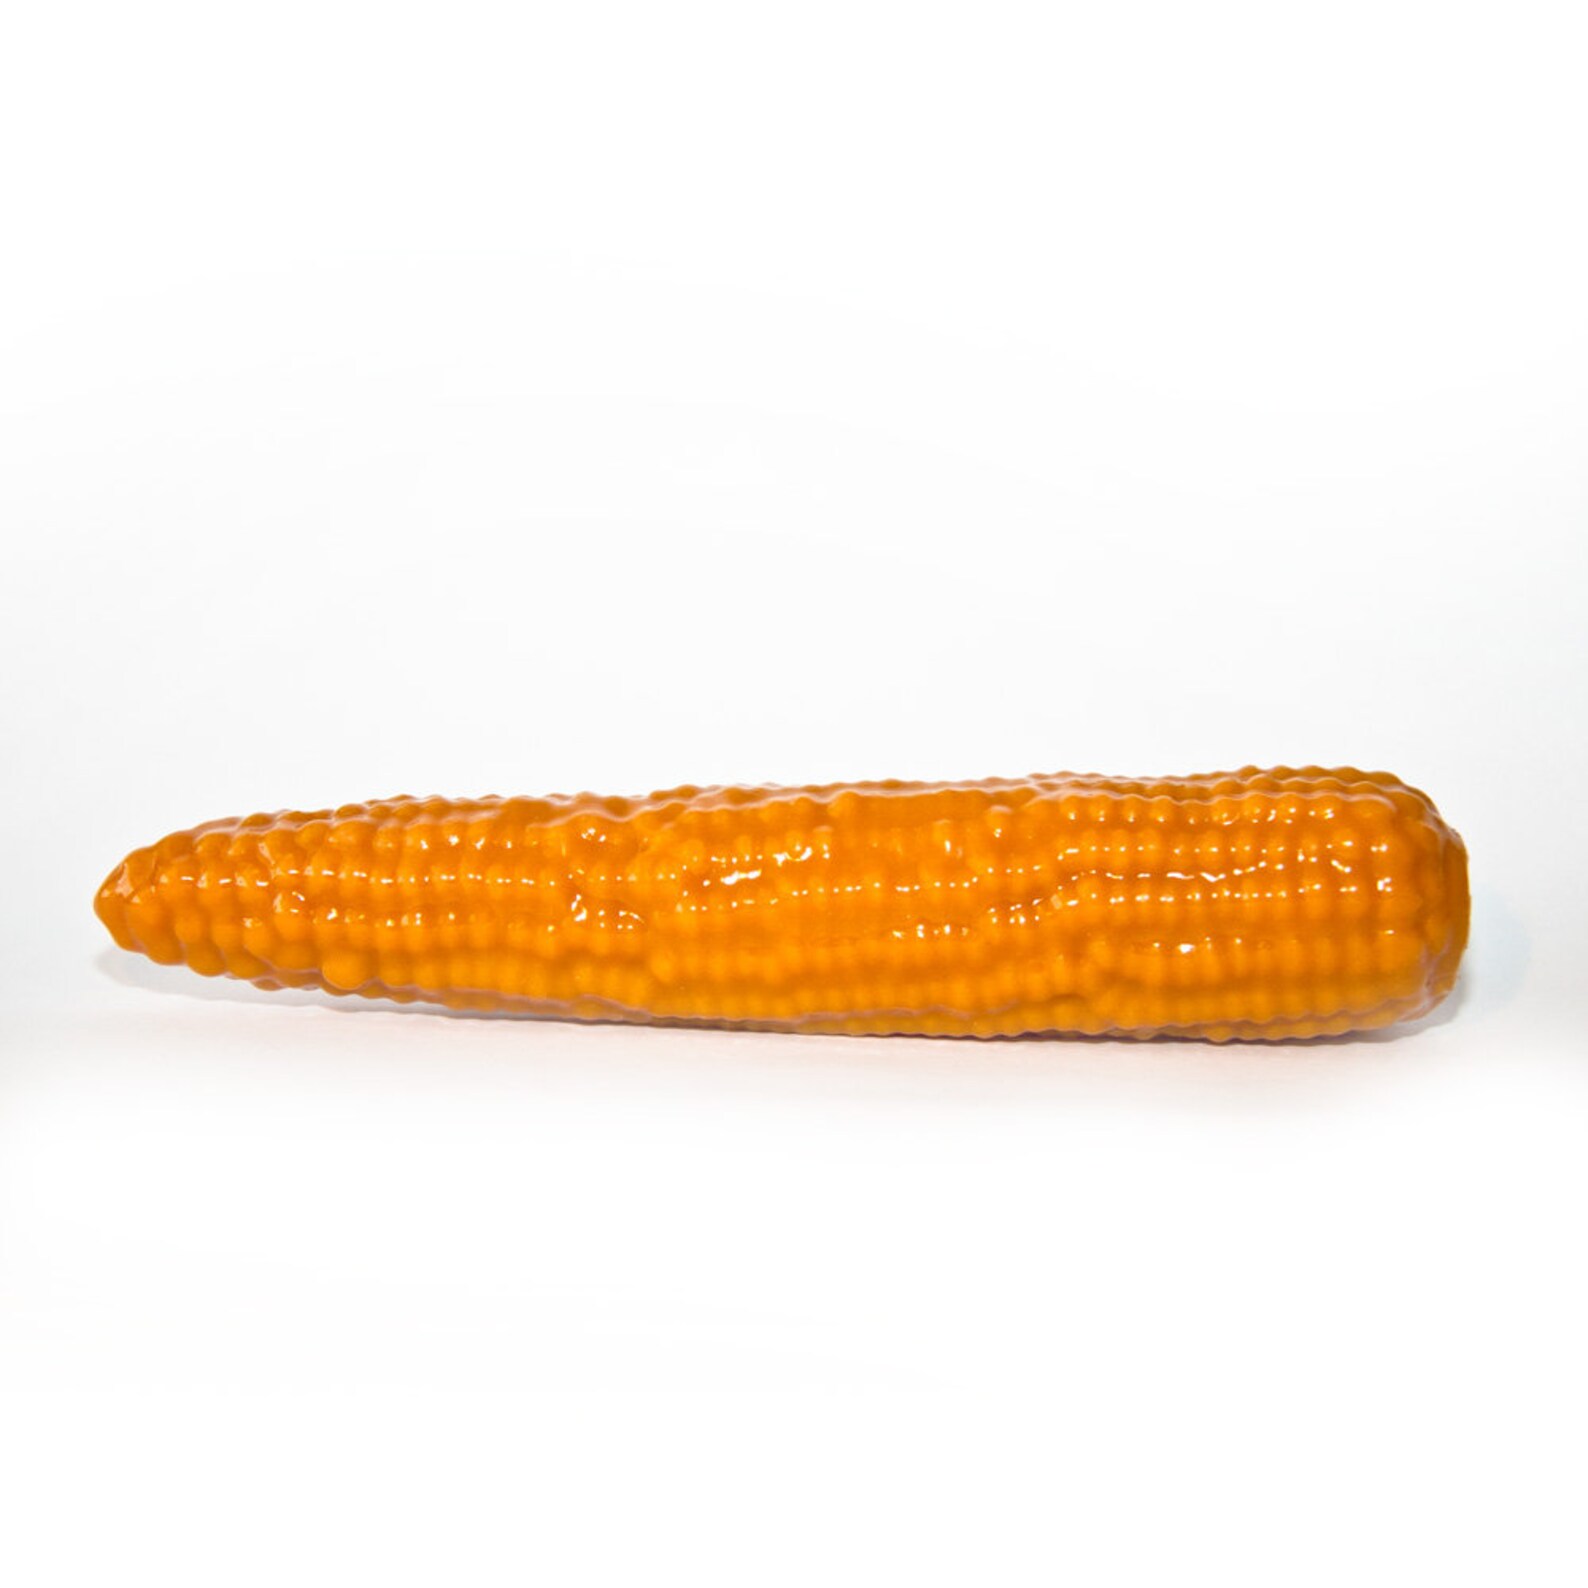 Corn on the cob : smooth silicone dildo with color change when image 0.